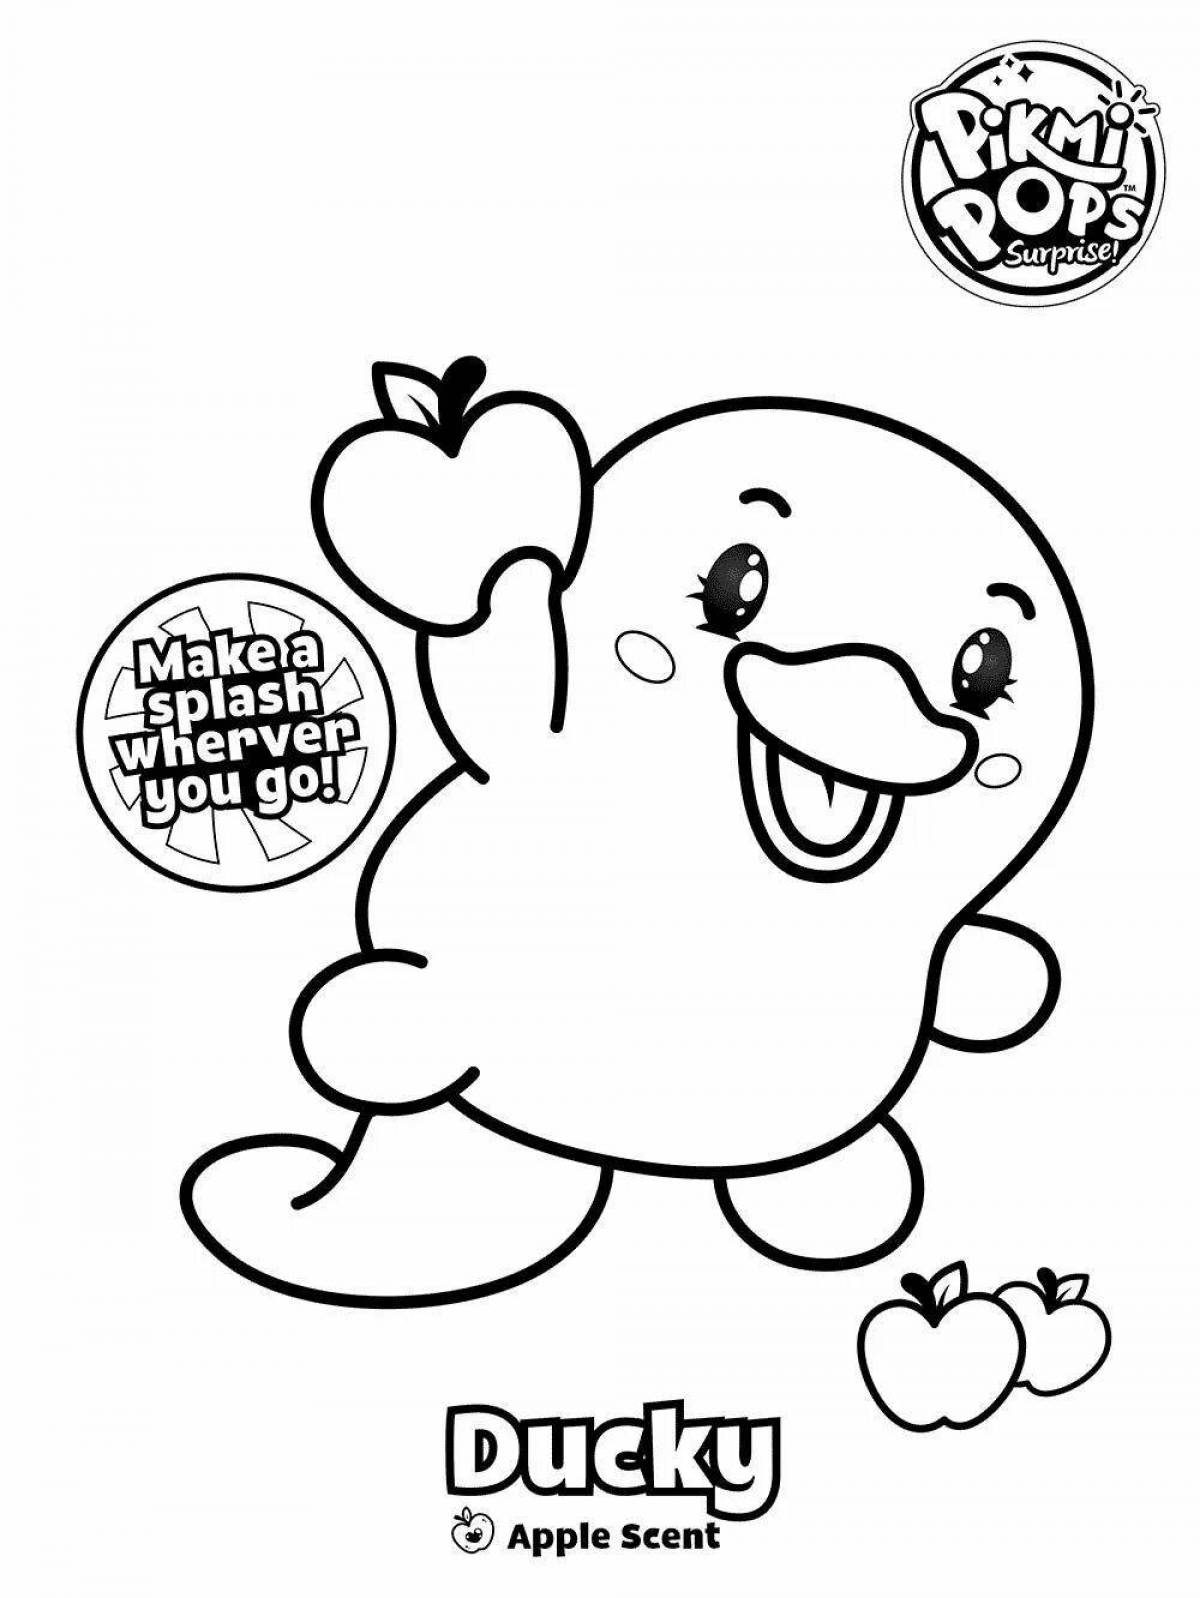 Amazing pikmy pops coloring page